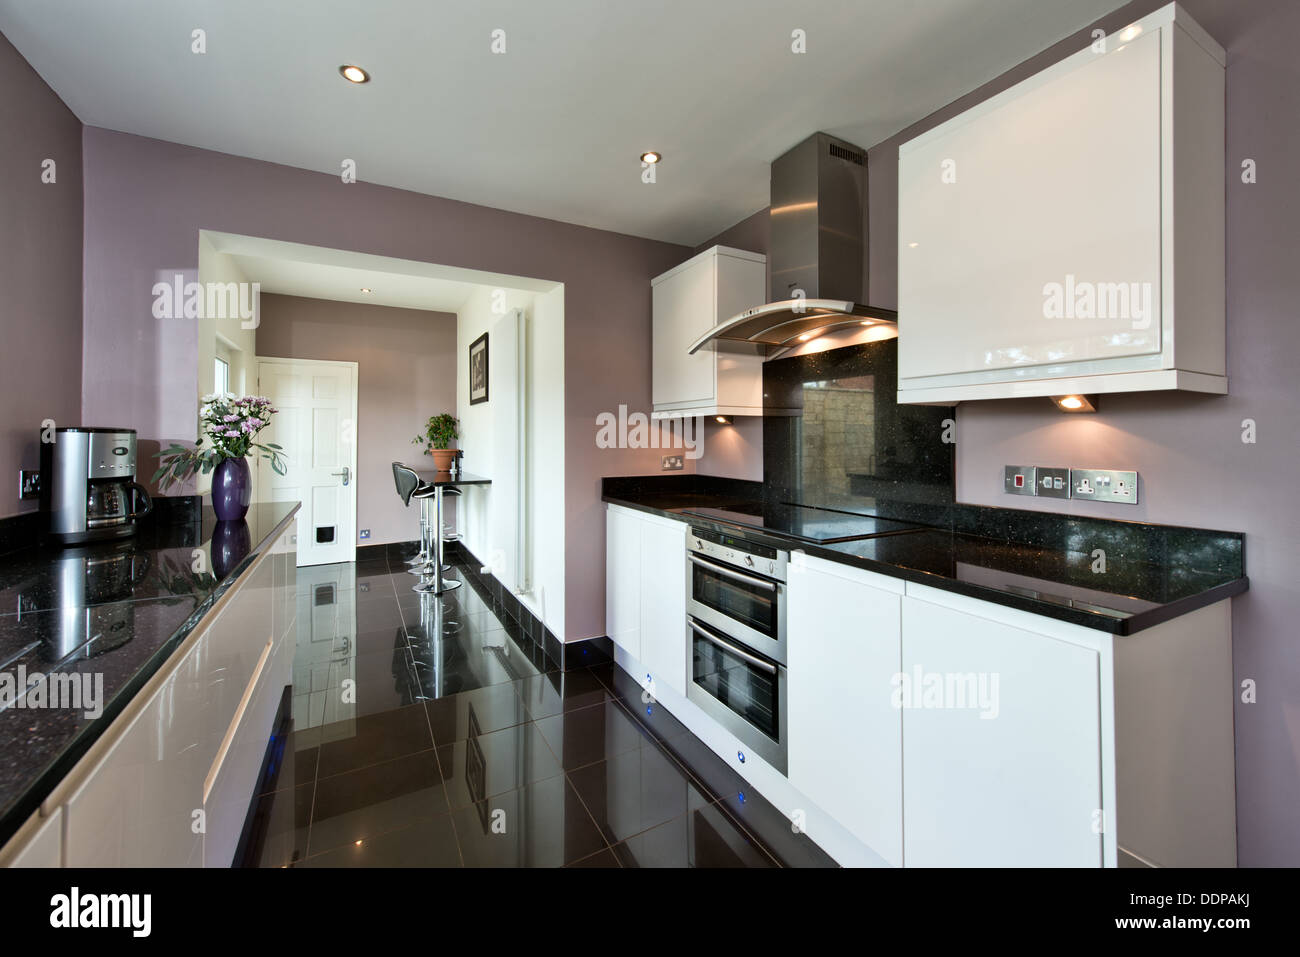 An installed clean modern designer kitchen in gloss white with black granite counter tops and floor tiles Stock Photo